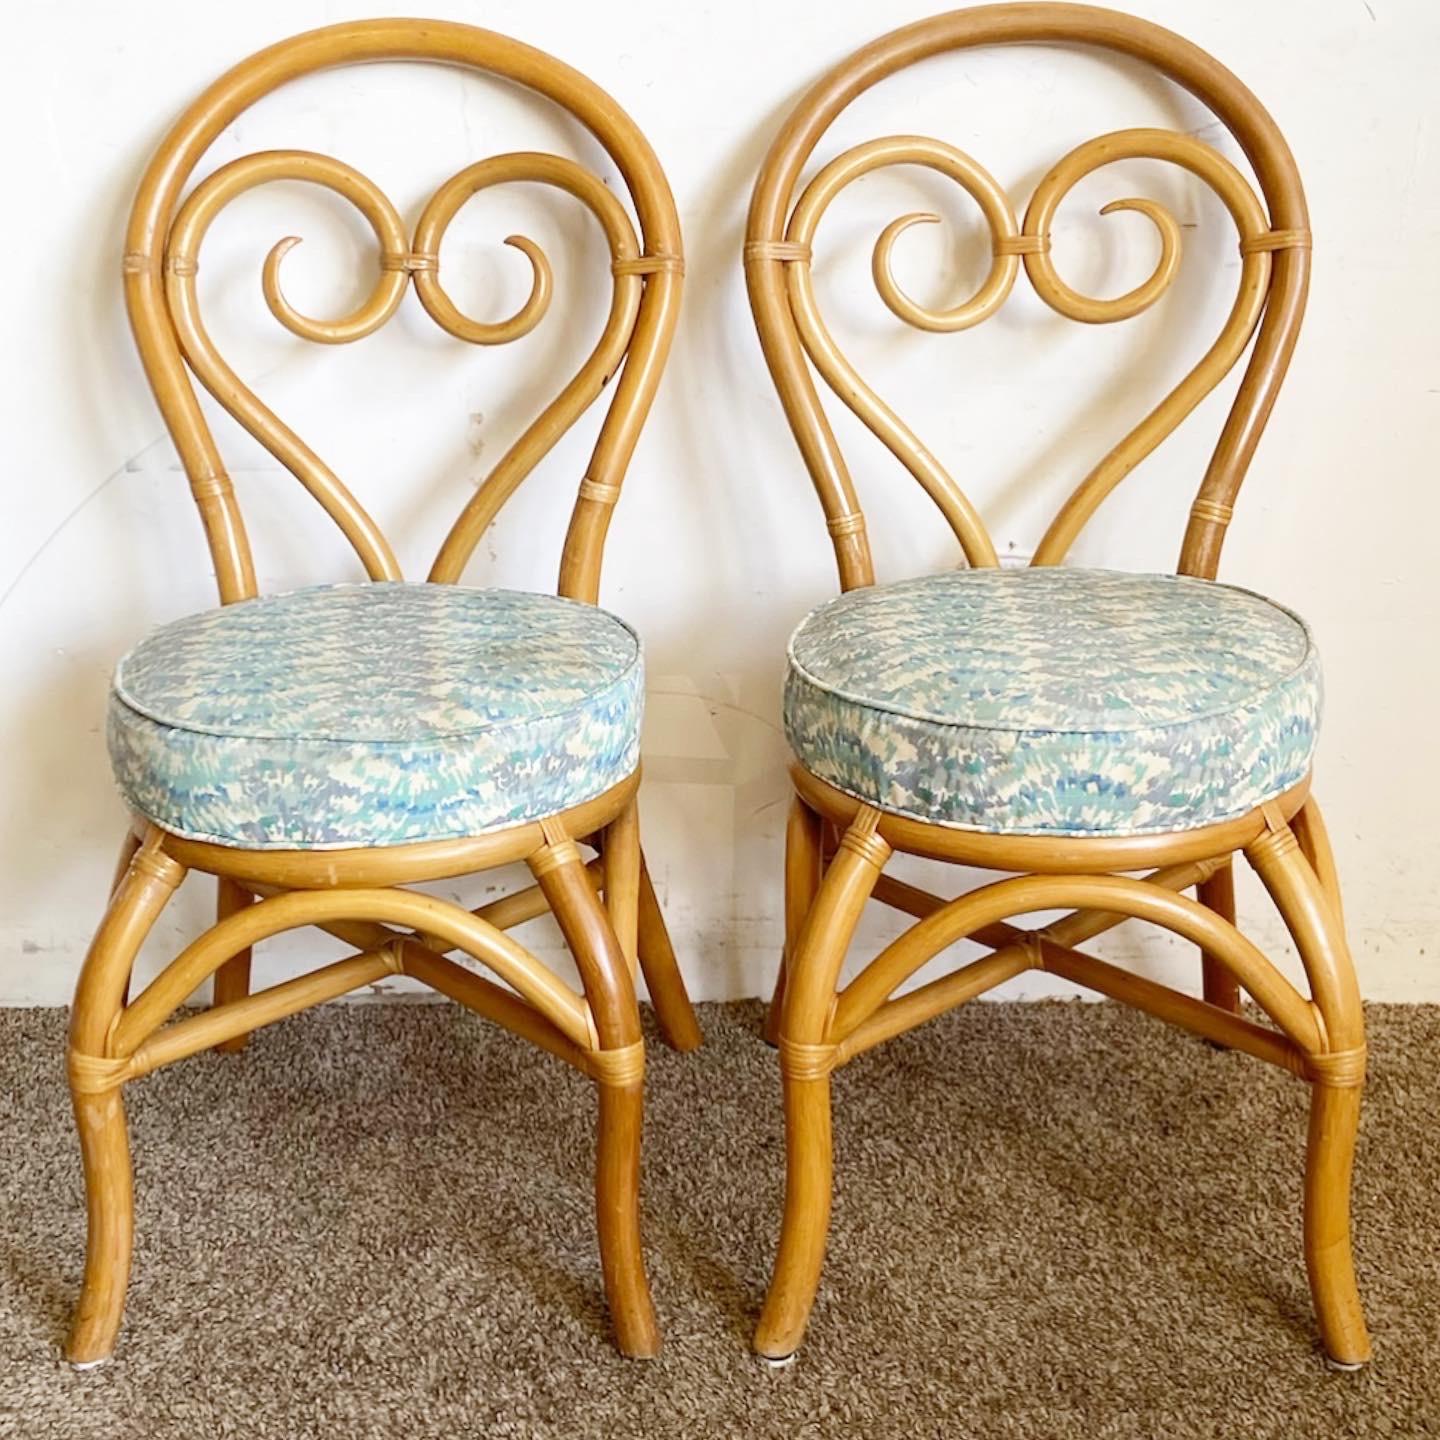 Bohemian Boho Chic Bent Bamboo Rattan Heart Back Dining Chairs - Set of 4 For Sale